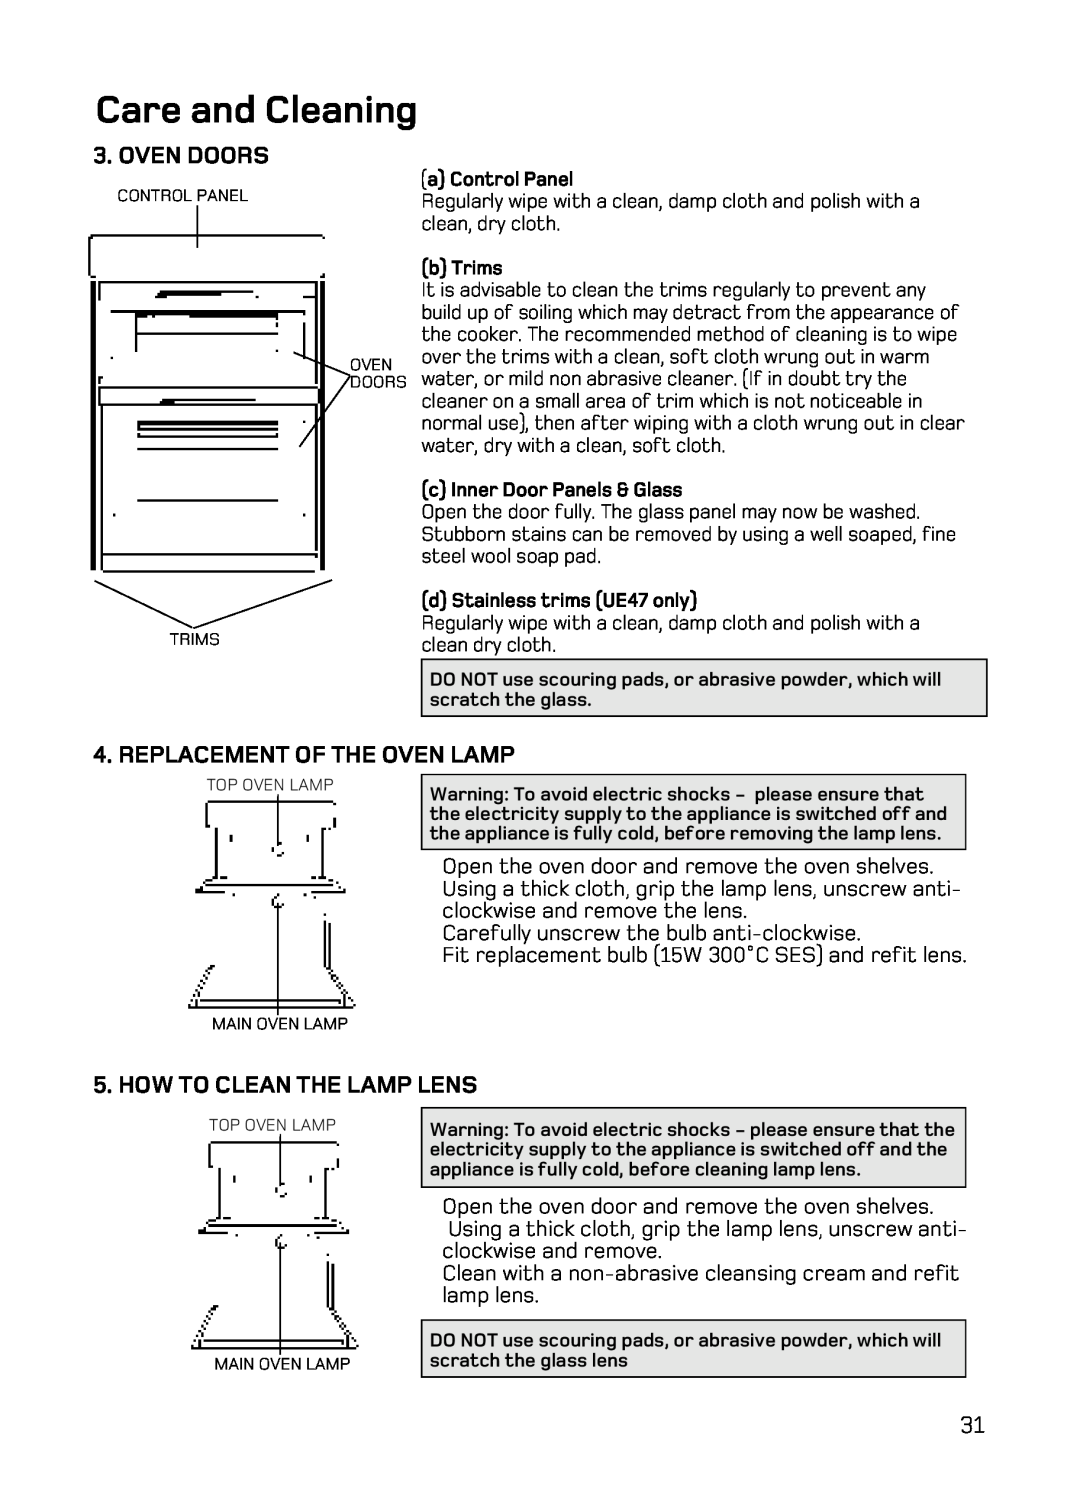 Hotpoint UE47 Care and Cleaning, Oven Doors, Replacement Of The Oven Lamp, How To Clean The Lamp Lens, a Control Panel 